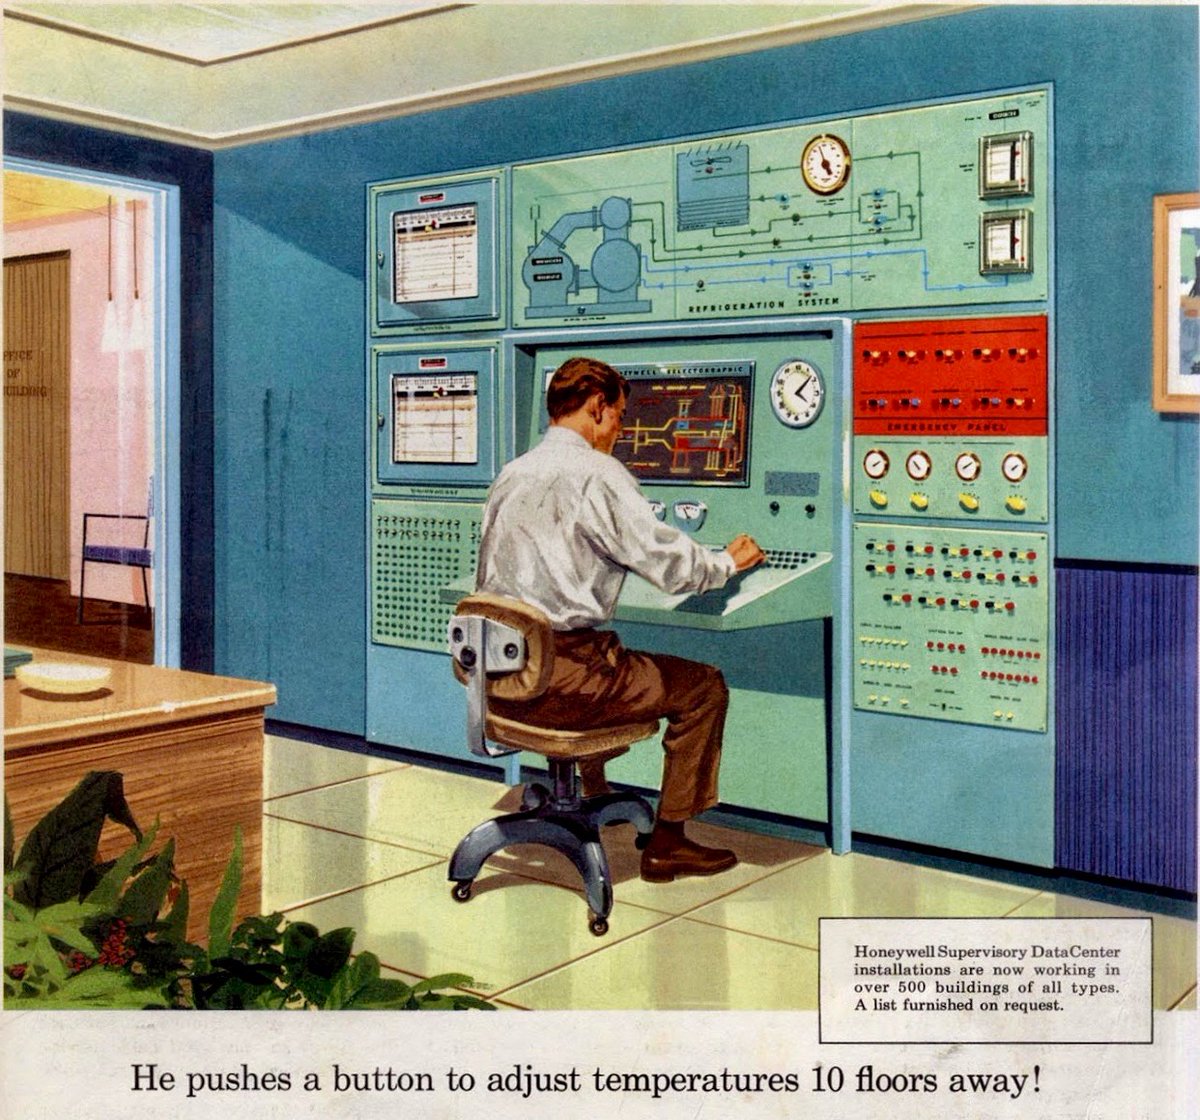 In #FEBRUARY 1959
🧵👇
‘He pushes a button to adjust temperatures 10 floors away!’
#illustration #illustrationart #systemcontrol #centralairconditioning #centralheating #climatecontrol